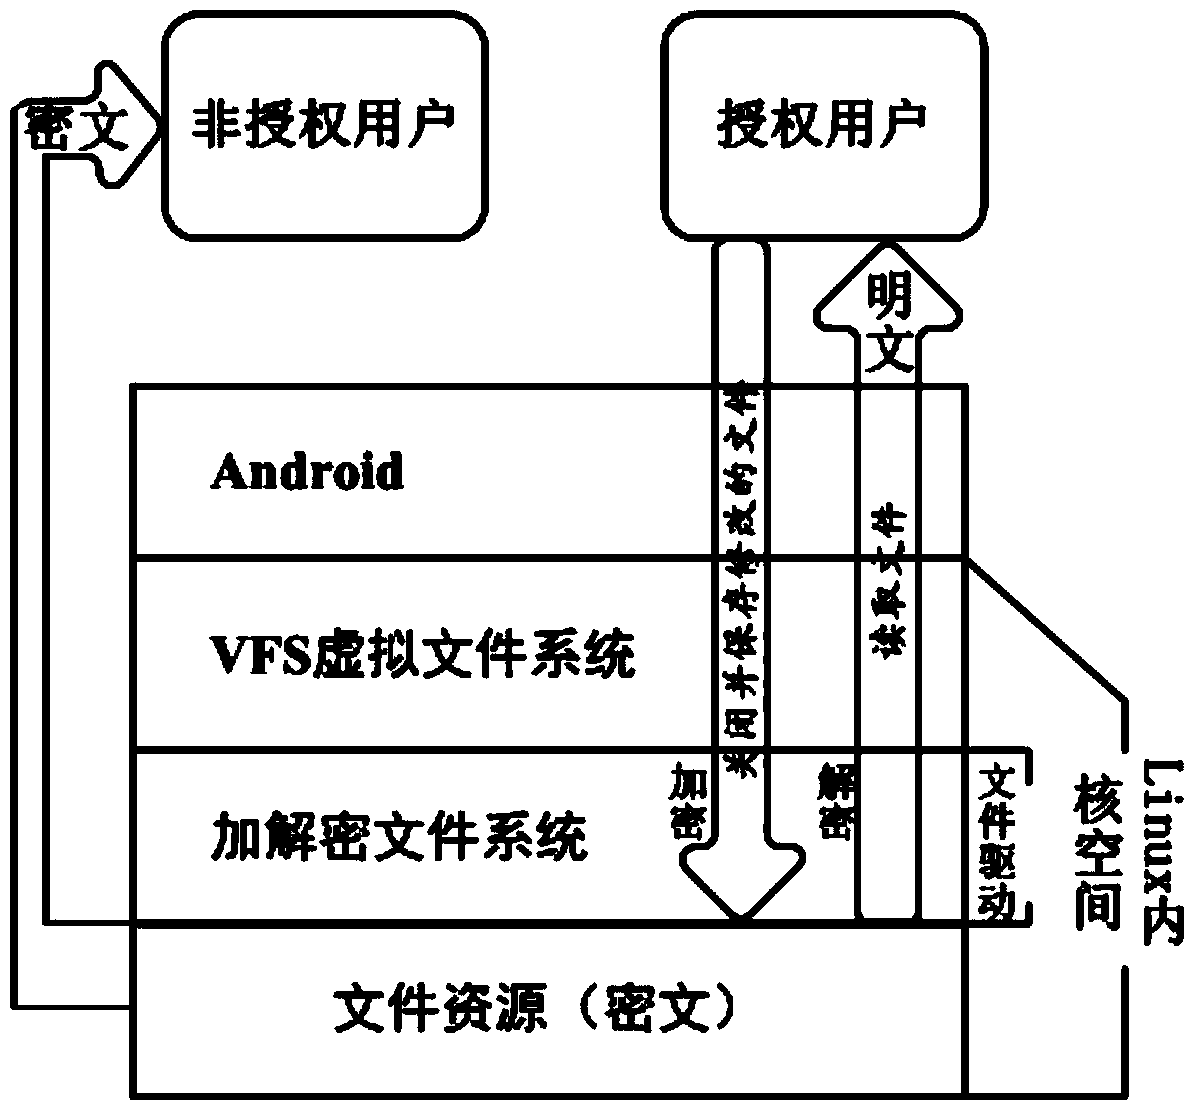 Method and system for file transparent encryption and decryption of Android platform